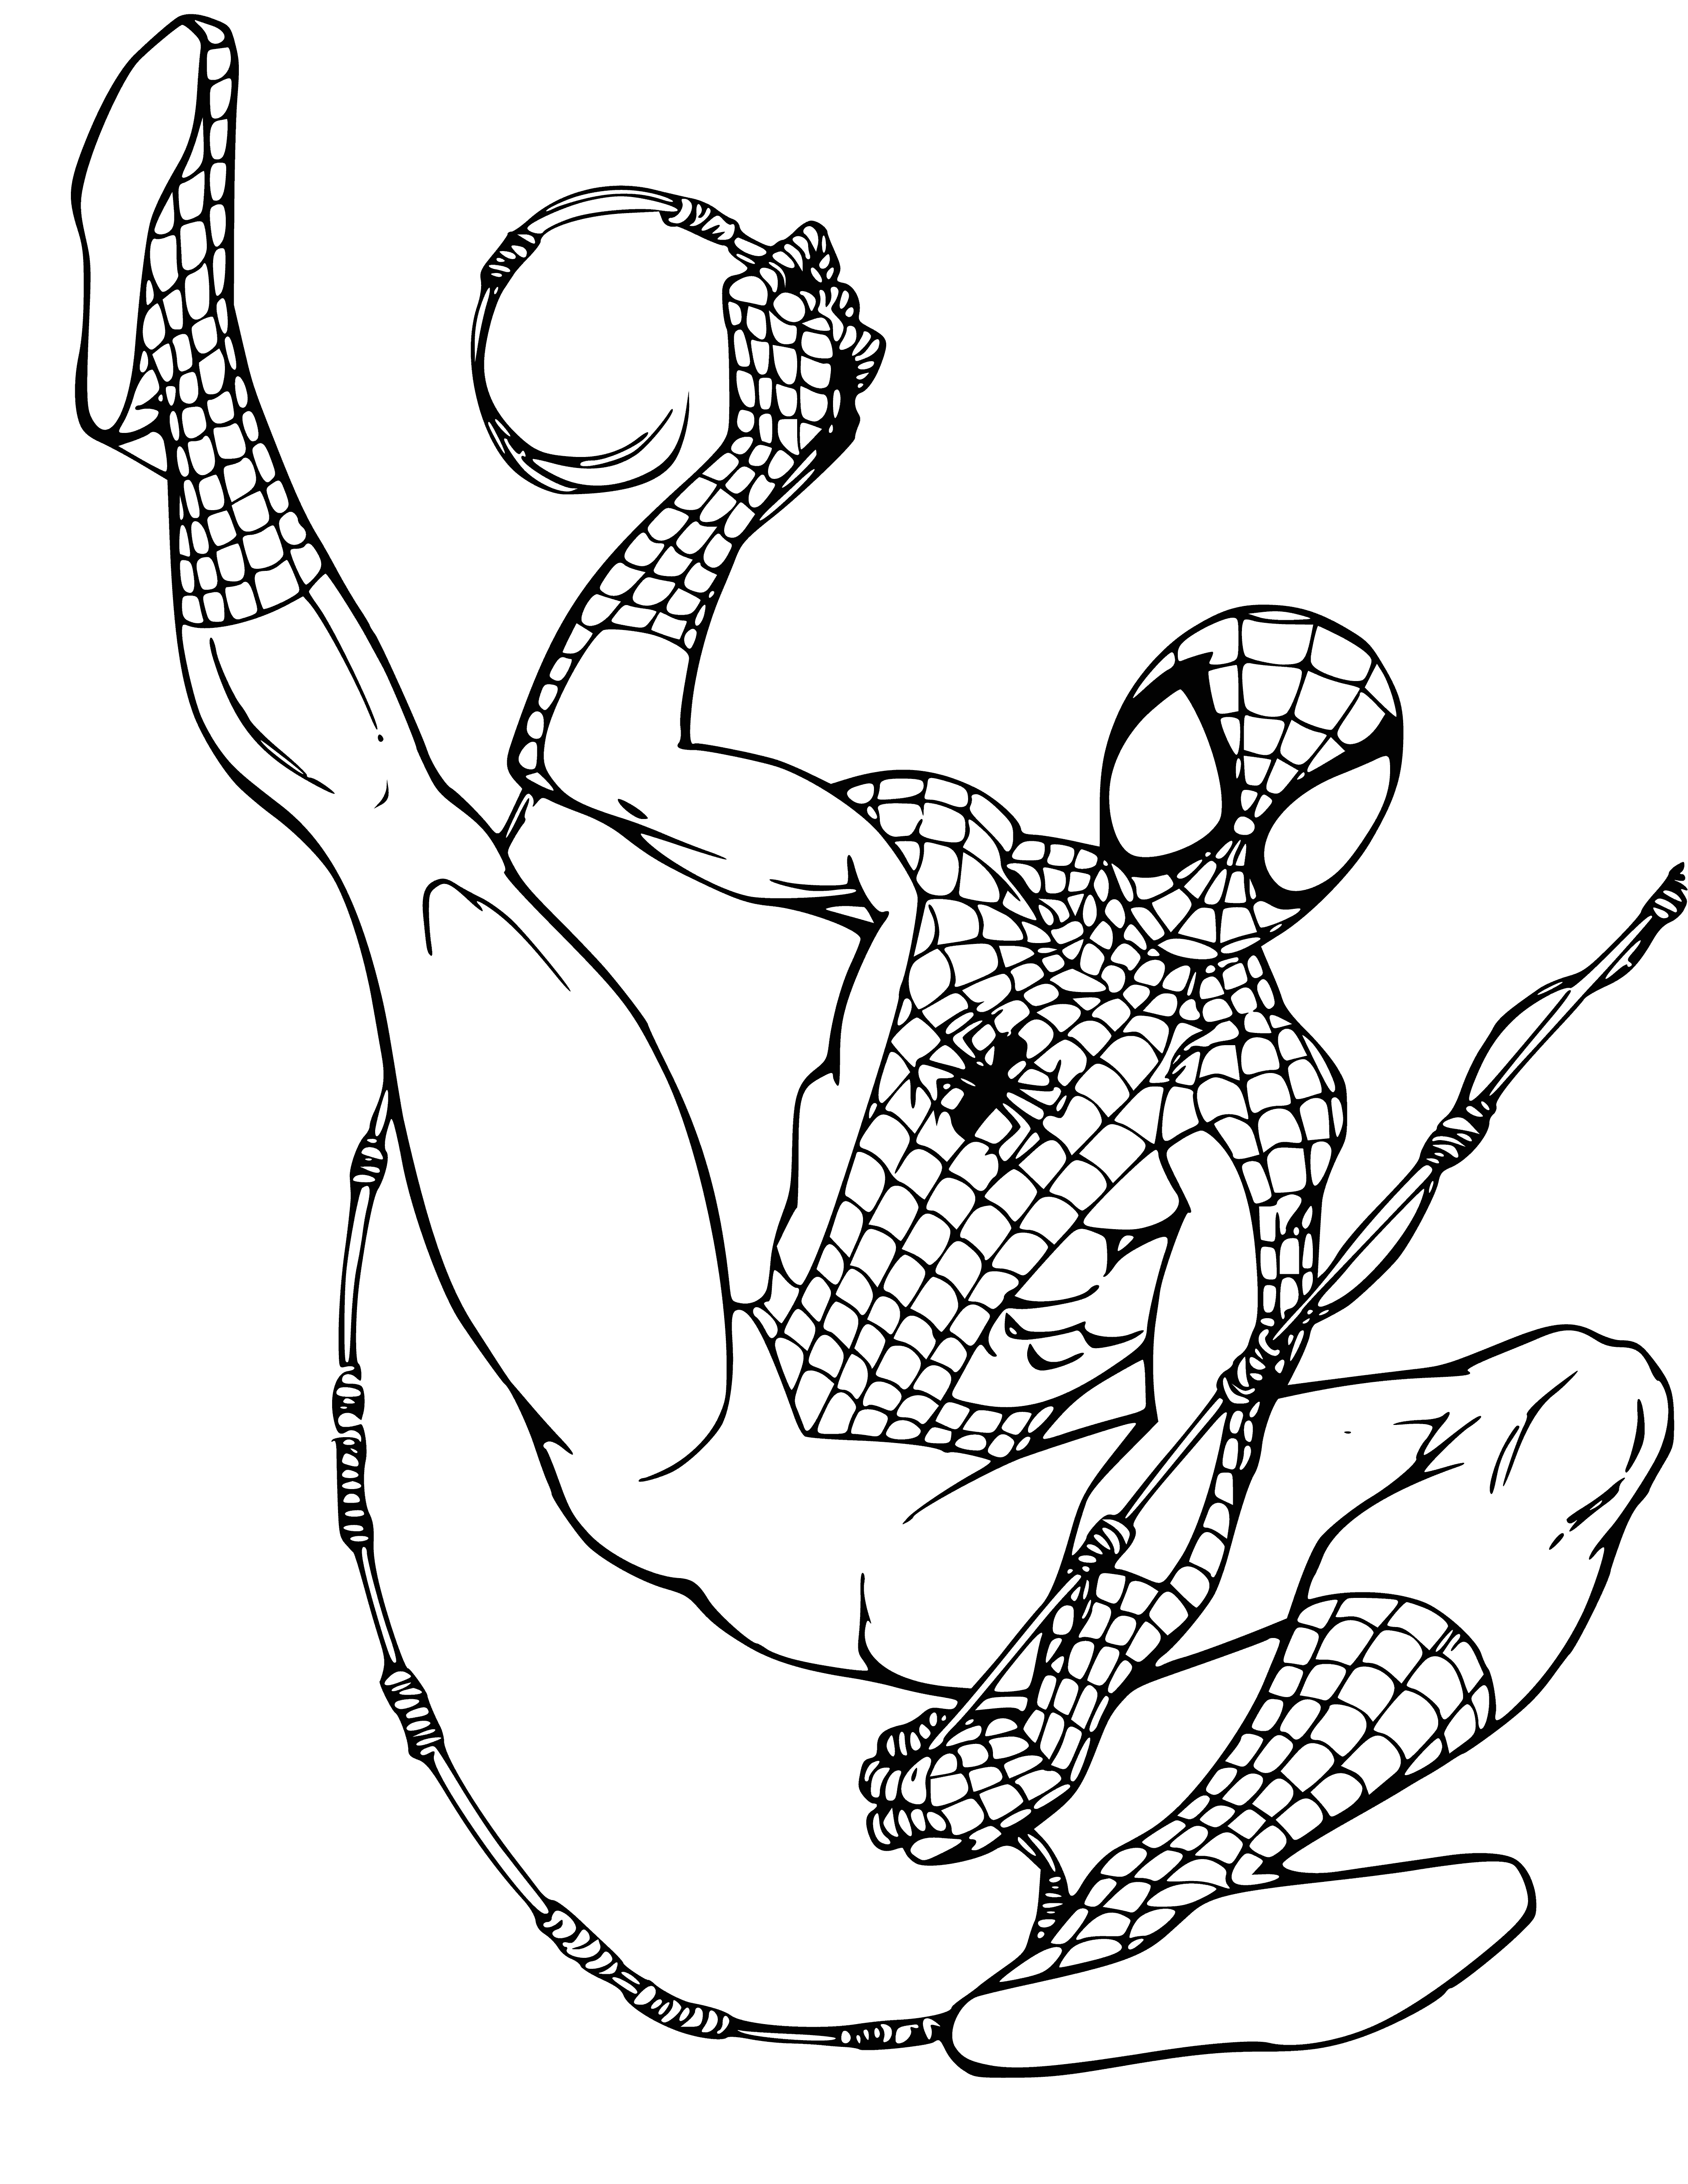 coloring page: A man in a spider suit stands atop a building with outstretched arms, looking off to the side.